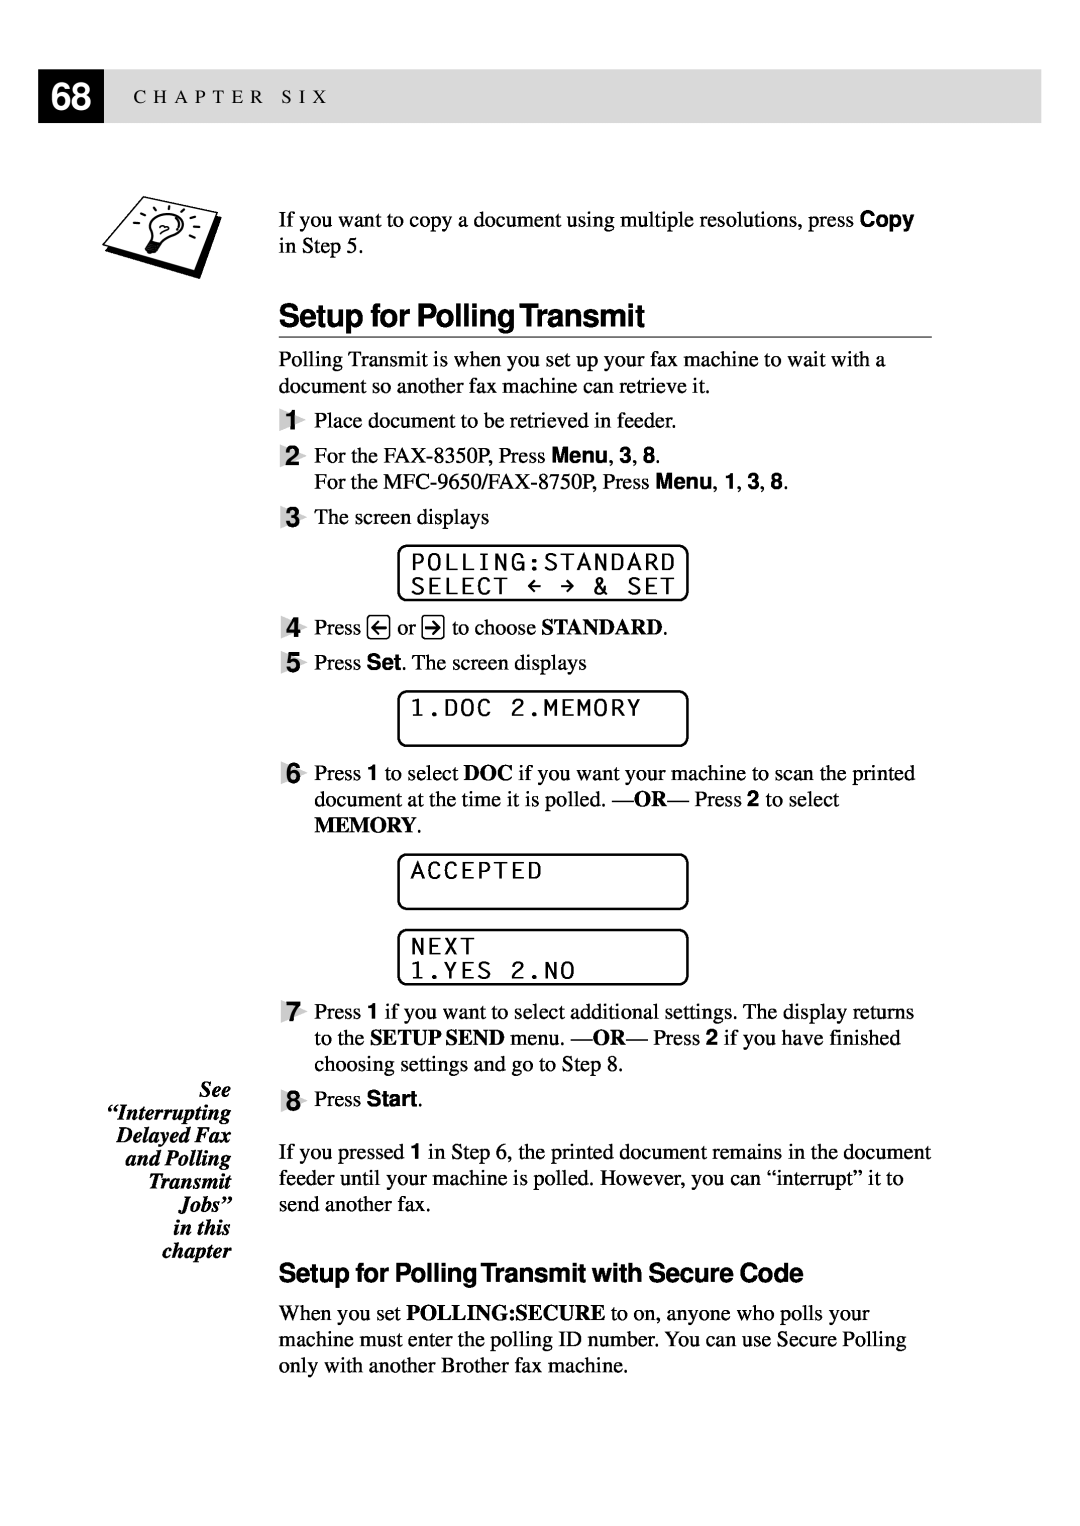 Brother FAX-8350P Setup for Polling Transmit with Secure Code, Pollingstandard Select & Set, DOC 2.MEMORY, Memory 